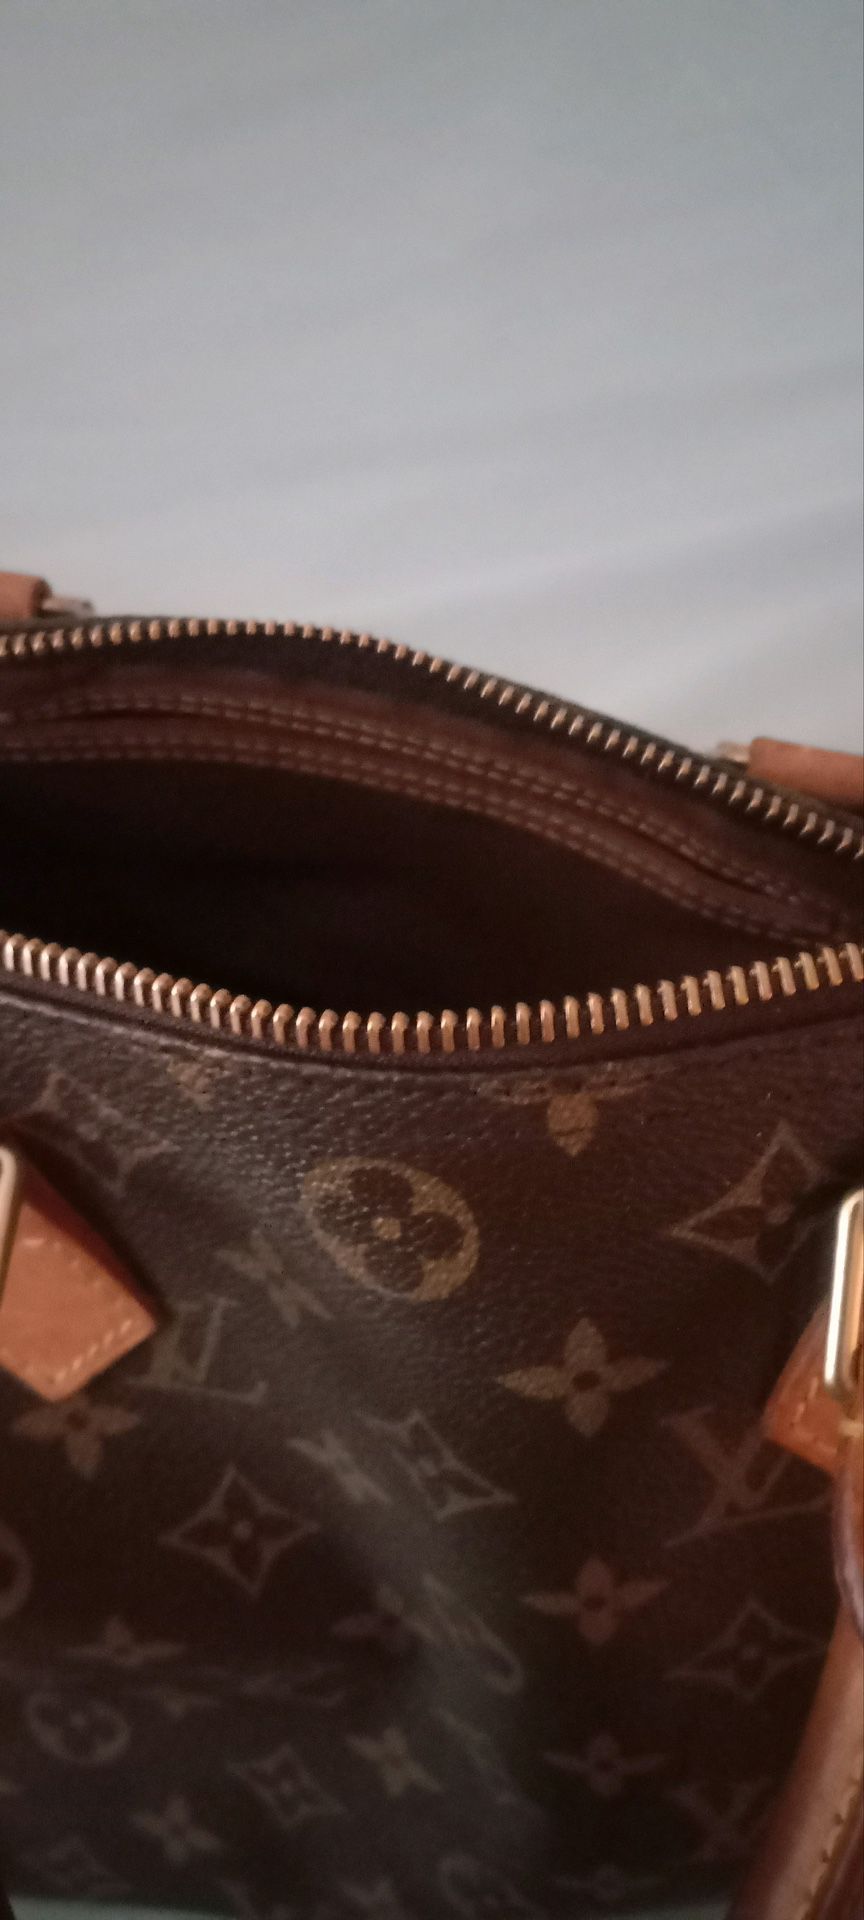 Authentic Louis Vuitton Bag for Sale in Apple Valley, CA - OfferUp